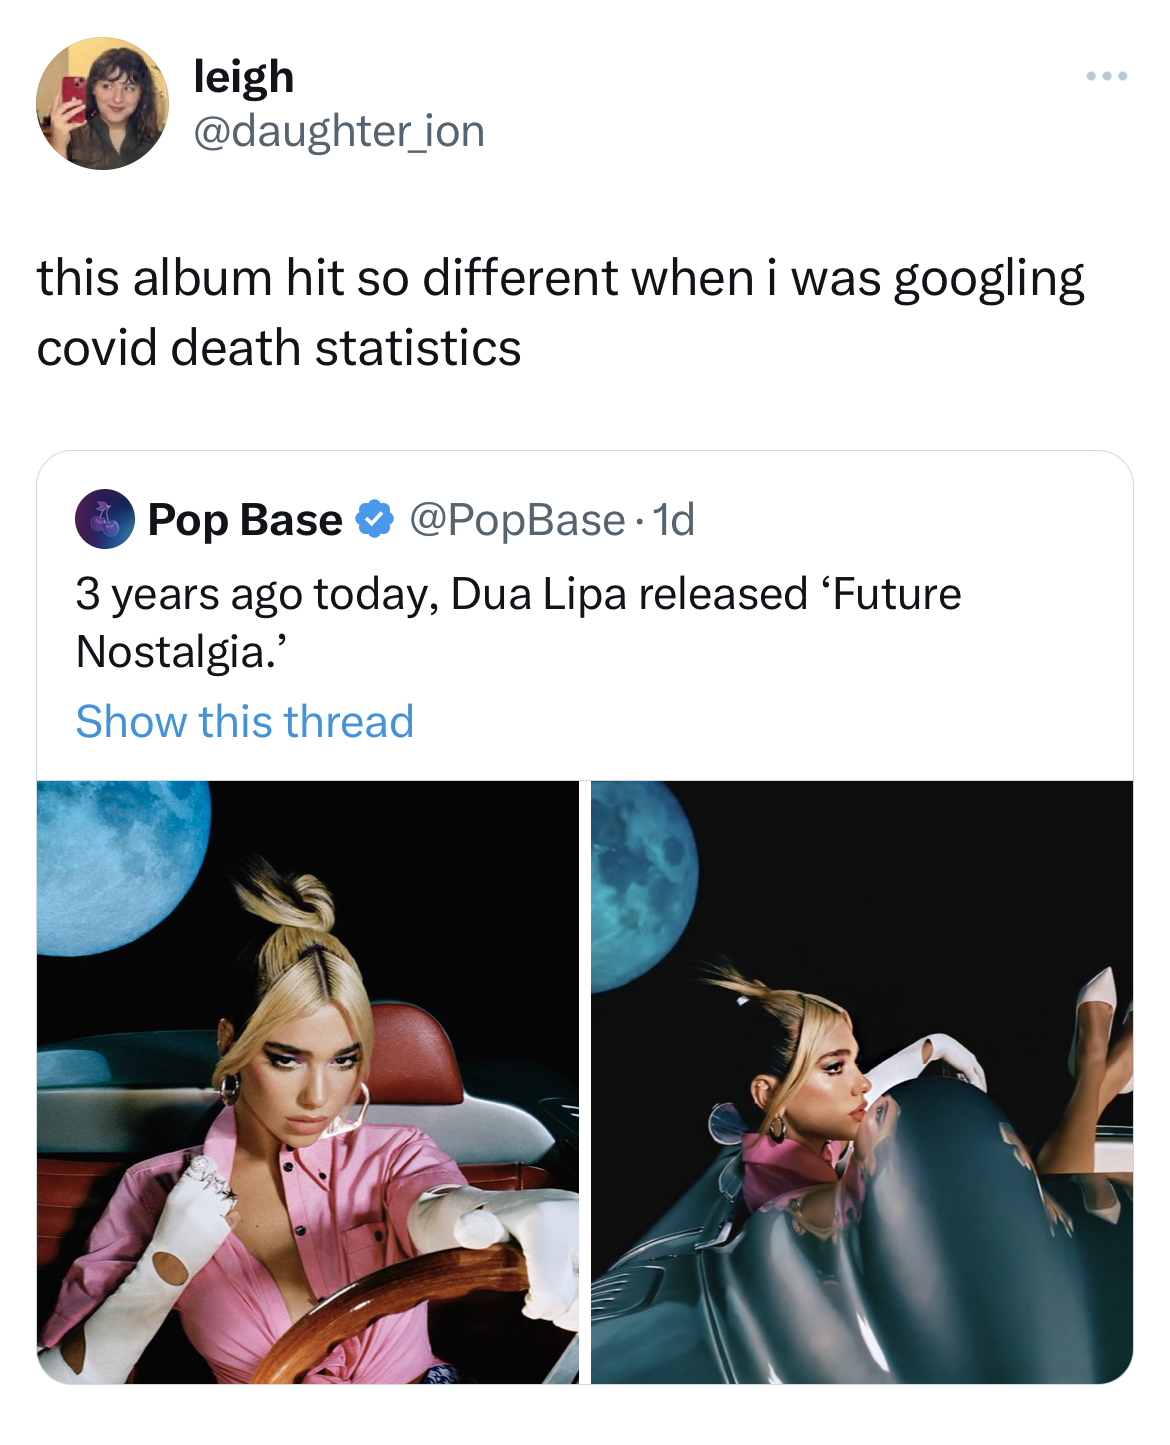 savage and absurd tweets - leigh this album hit so different when i was googling covid death statistics Pop Base 3 years ago today, Dua Lipa released 'Future Nostalgia.' Show this thread